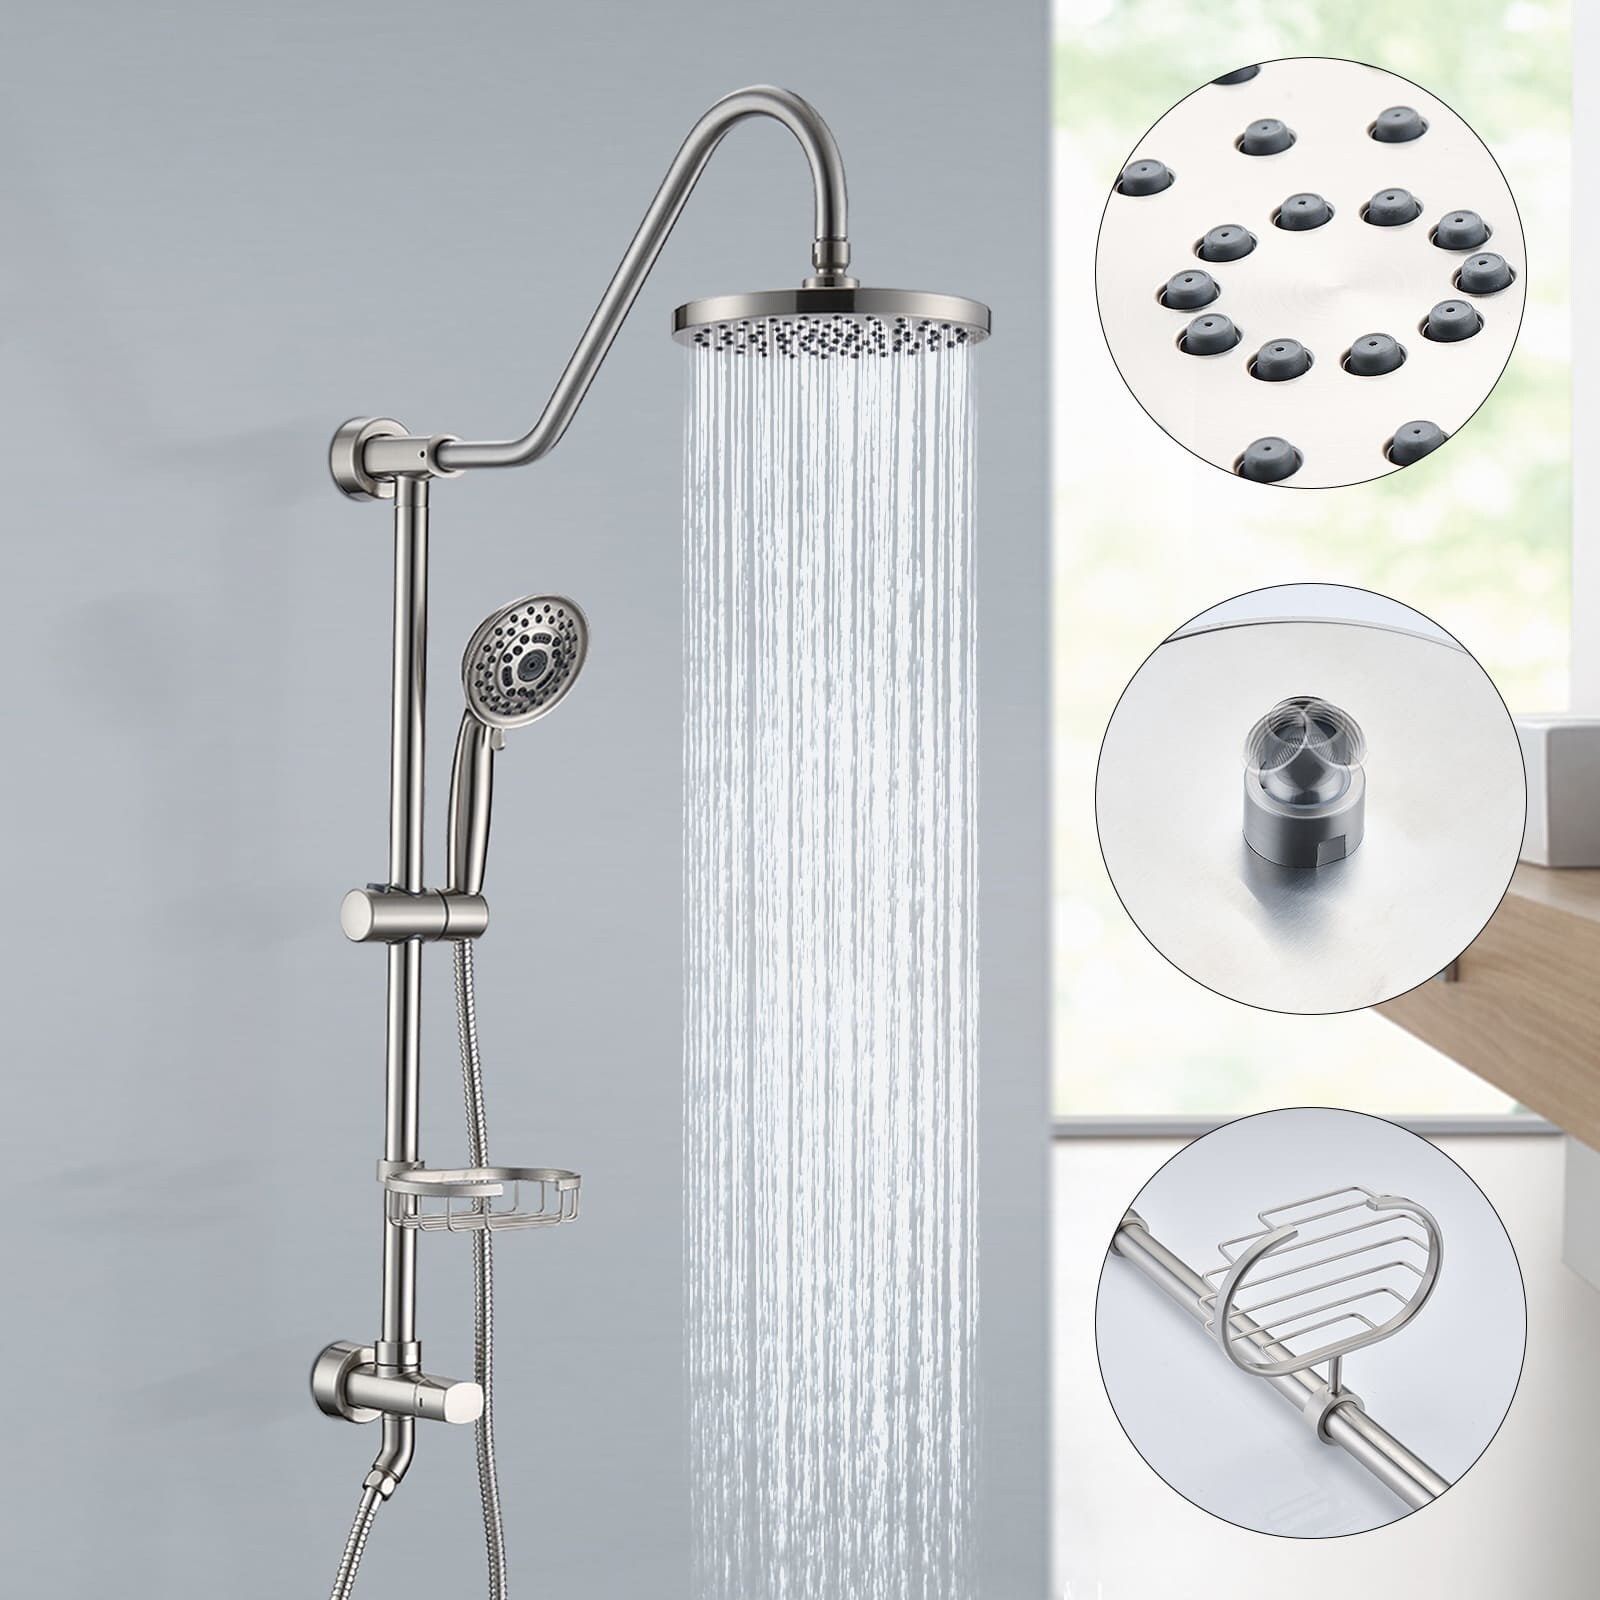 Wall-mounted complete shower system with soap dish (not including